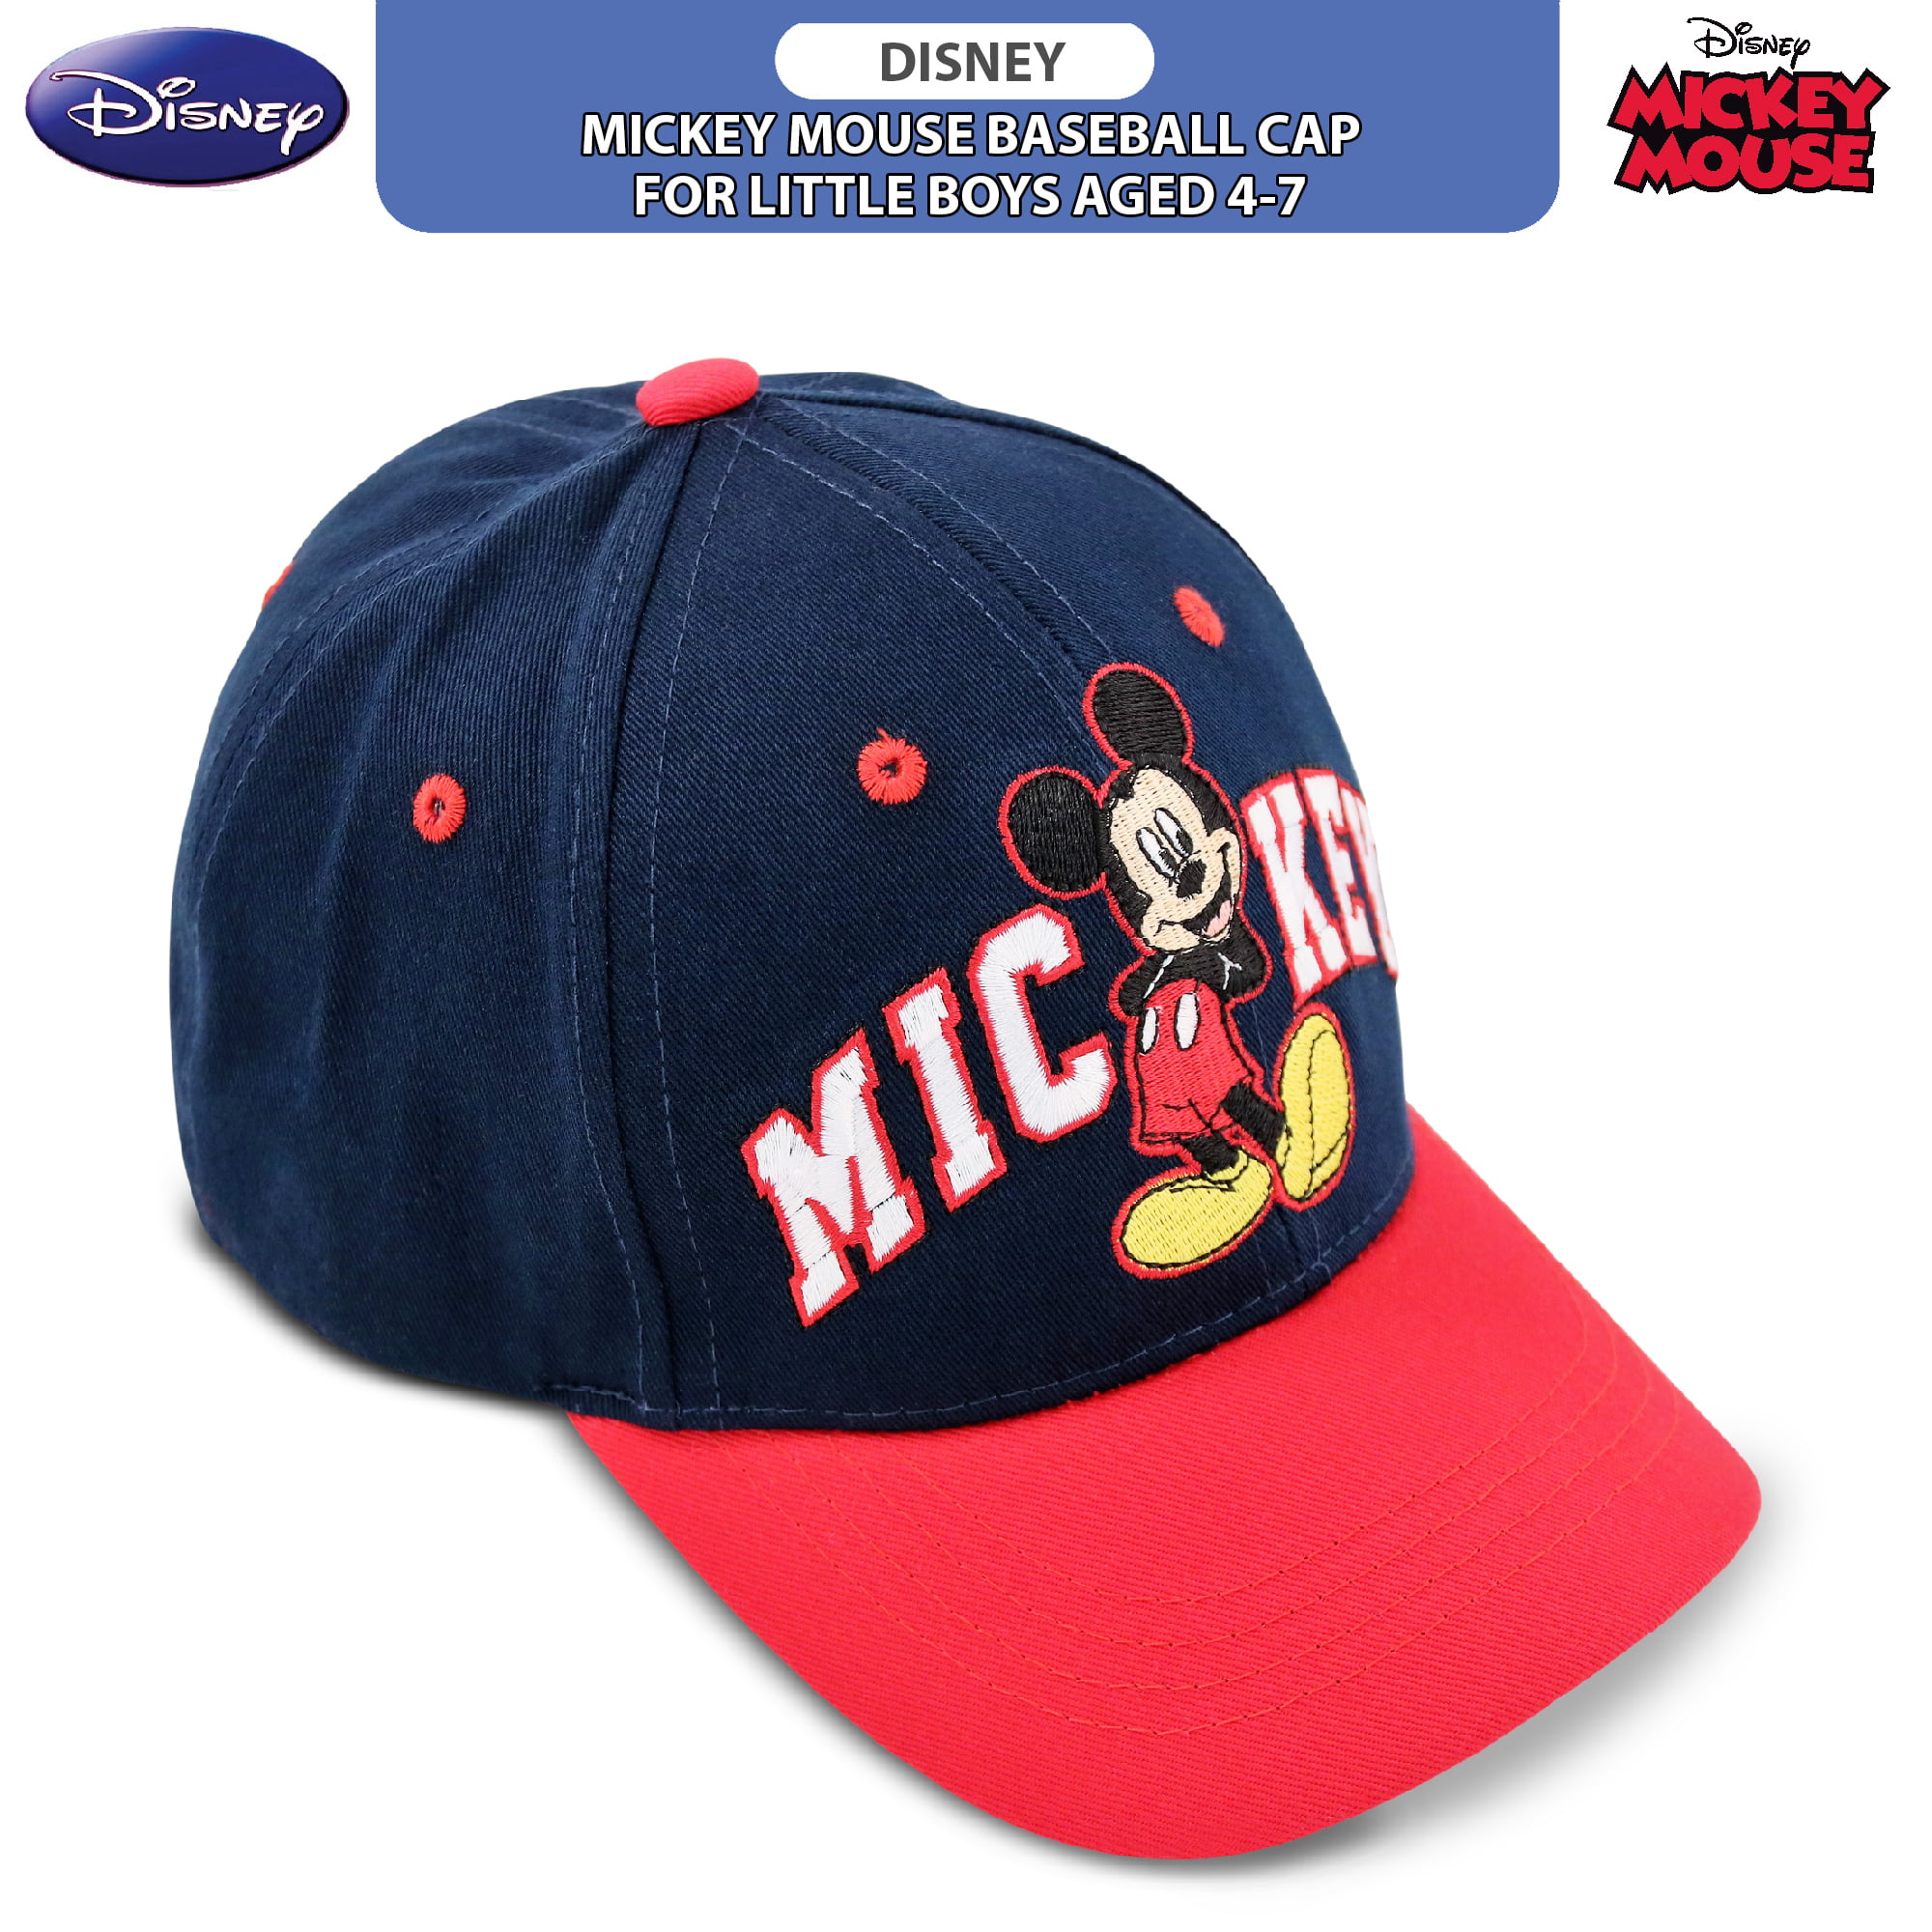 Disney Mickey Mouse Cap Kids Daddy and Toddler Or Little Boys Baseball Hat Ages 2-7 